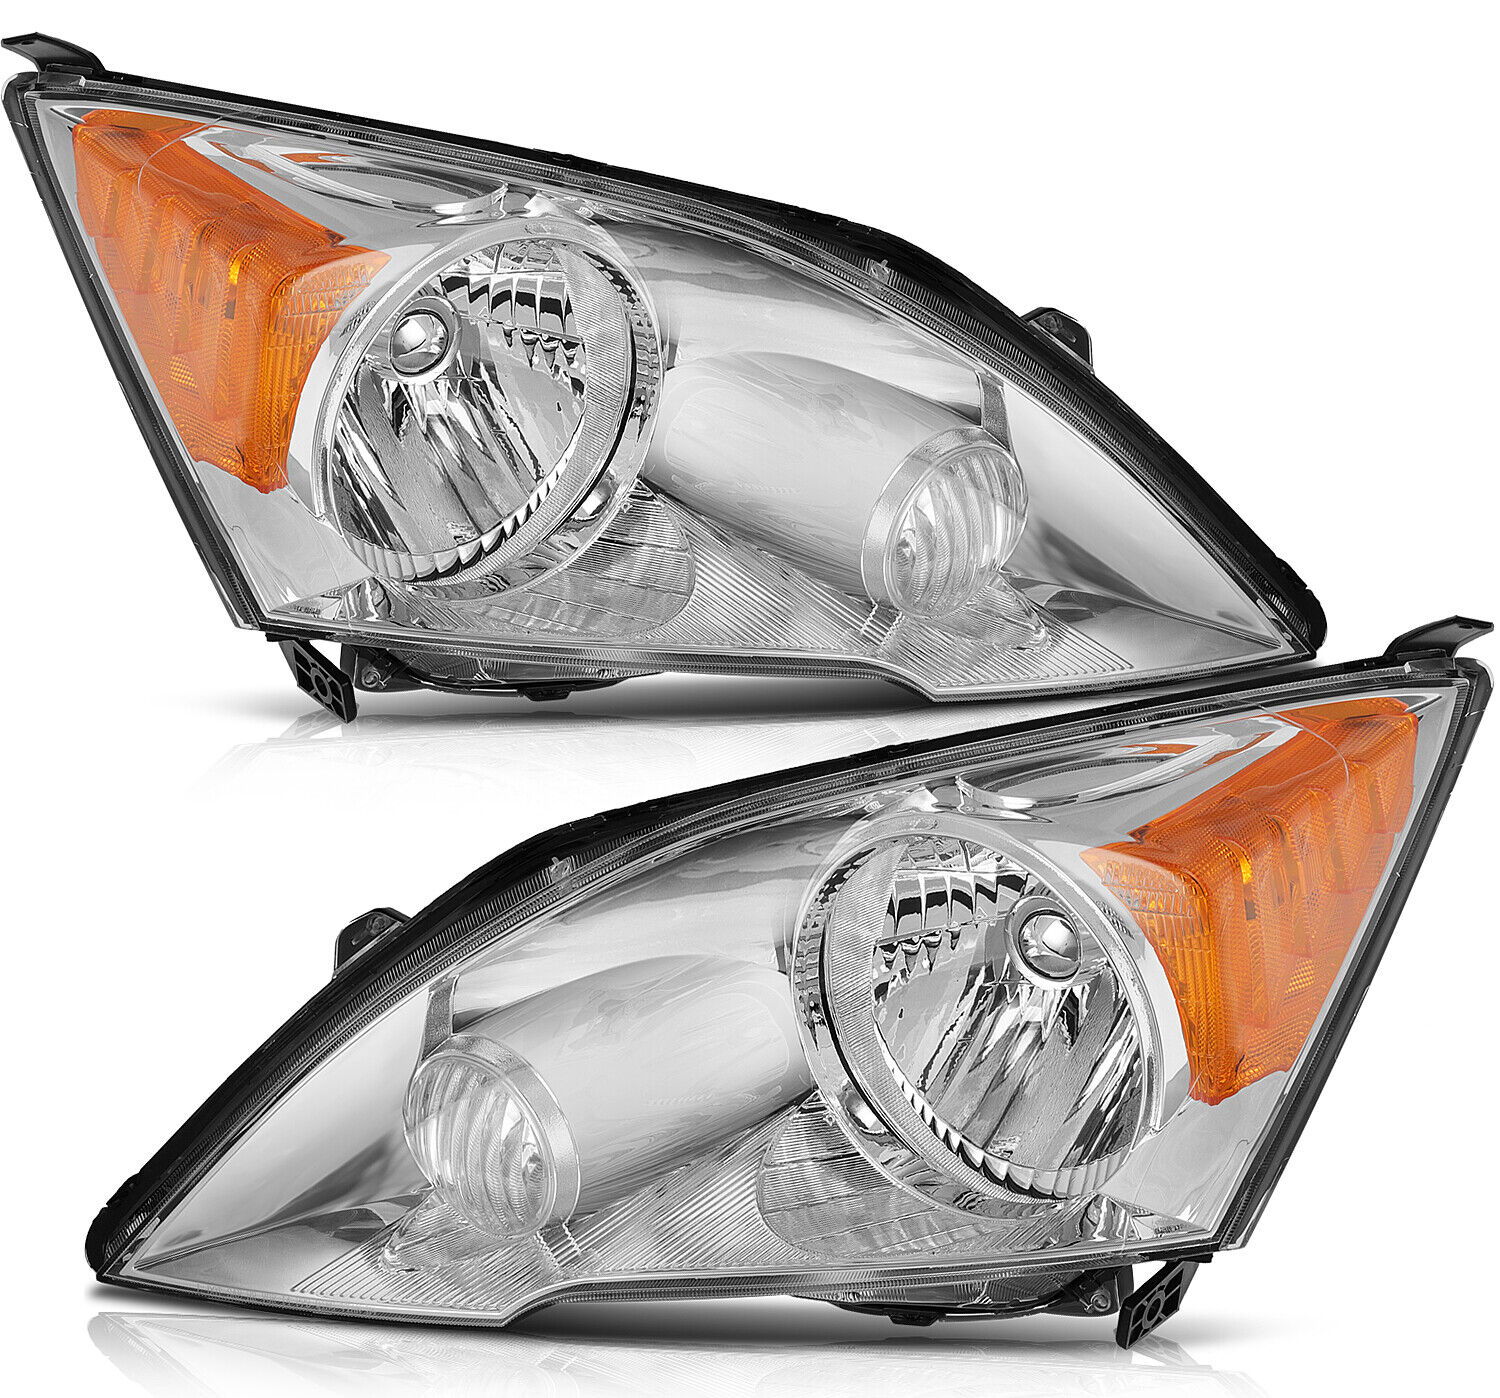 Fits 2007-2011 Honda CR-V Front Headlights Assembly Pair Left Right Clear Lens